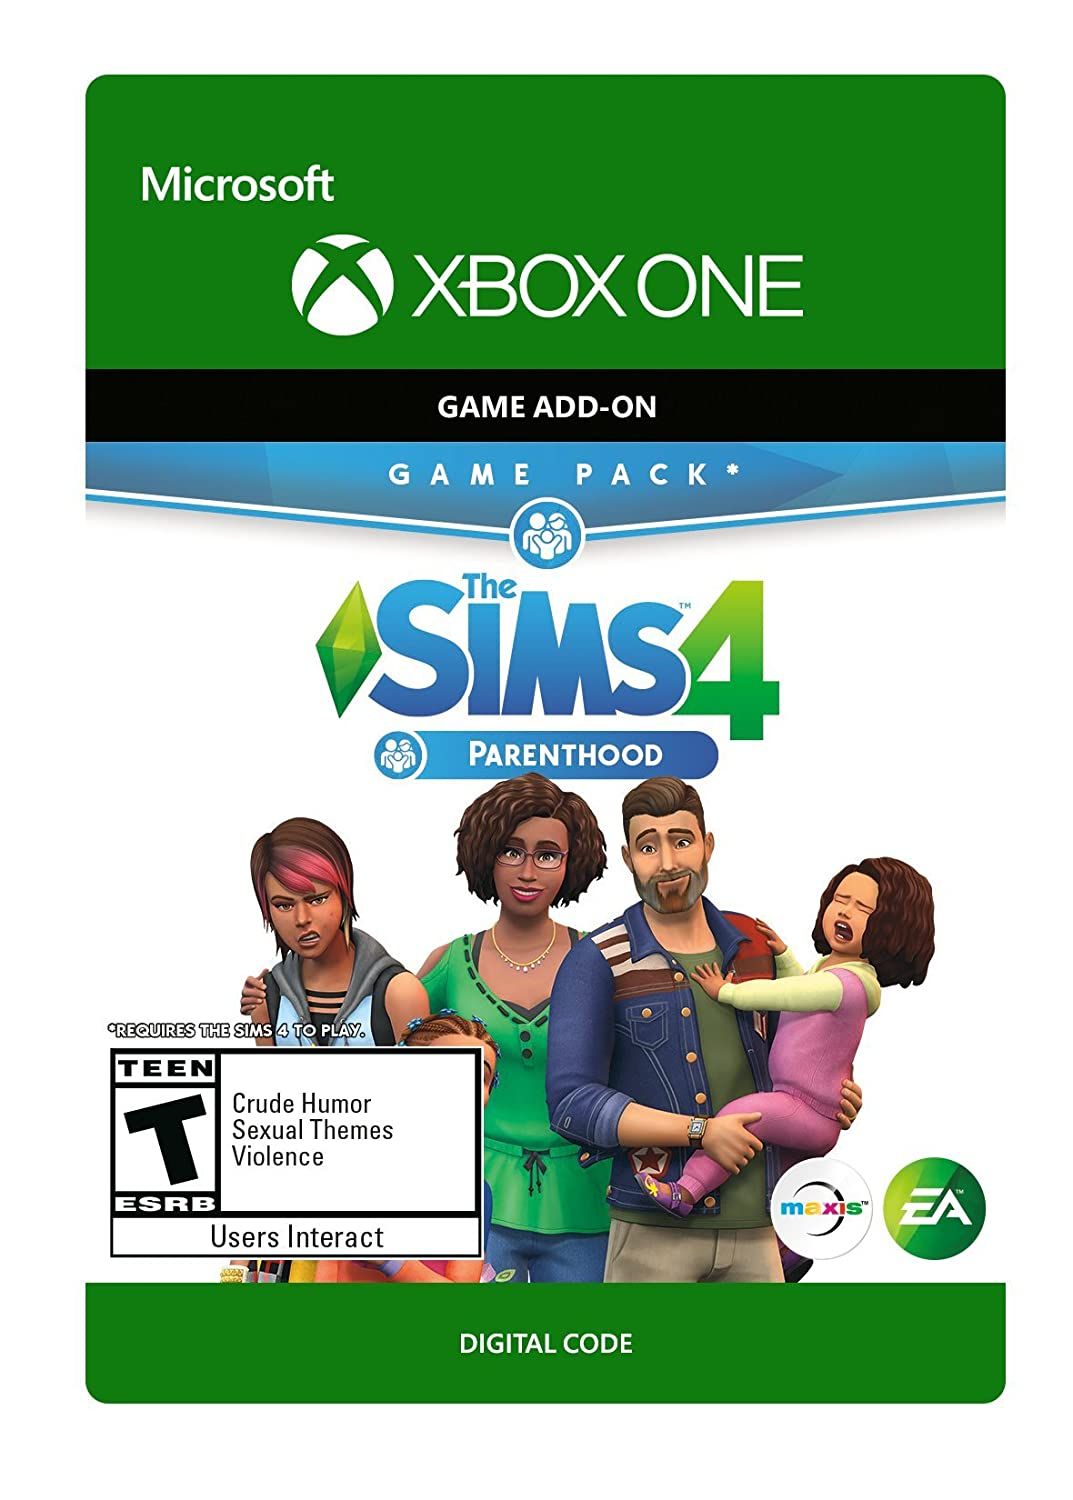 which sims 4 expansion is the best